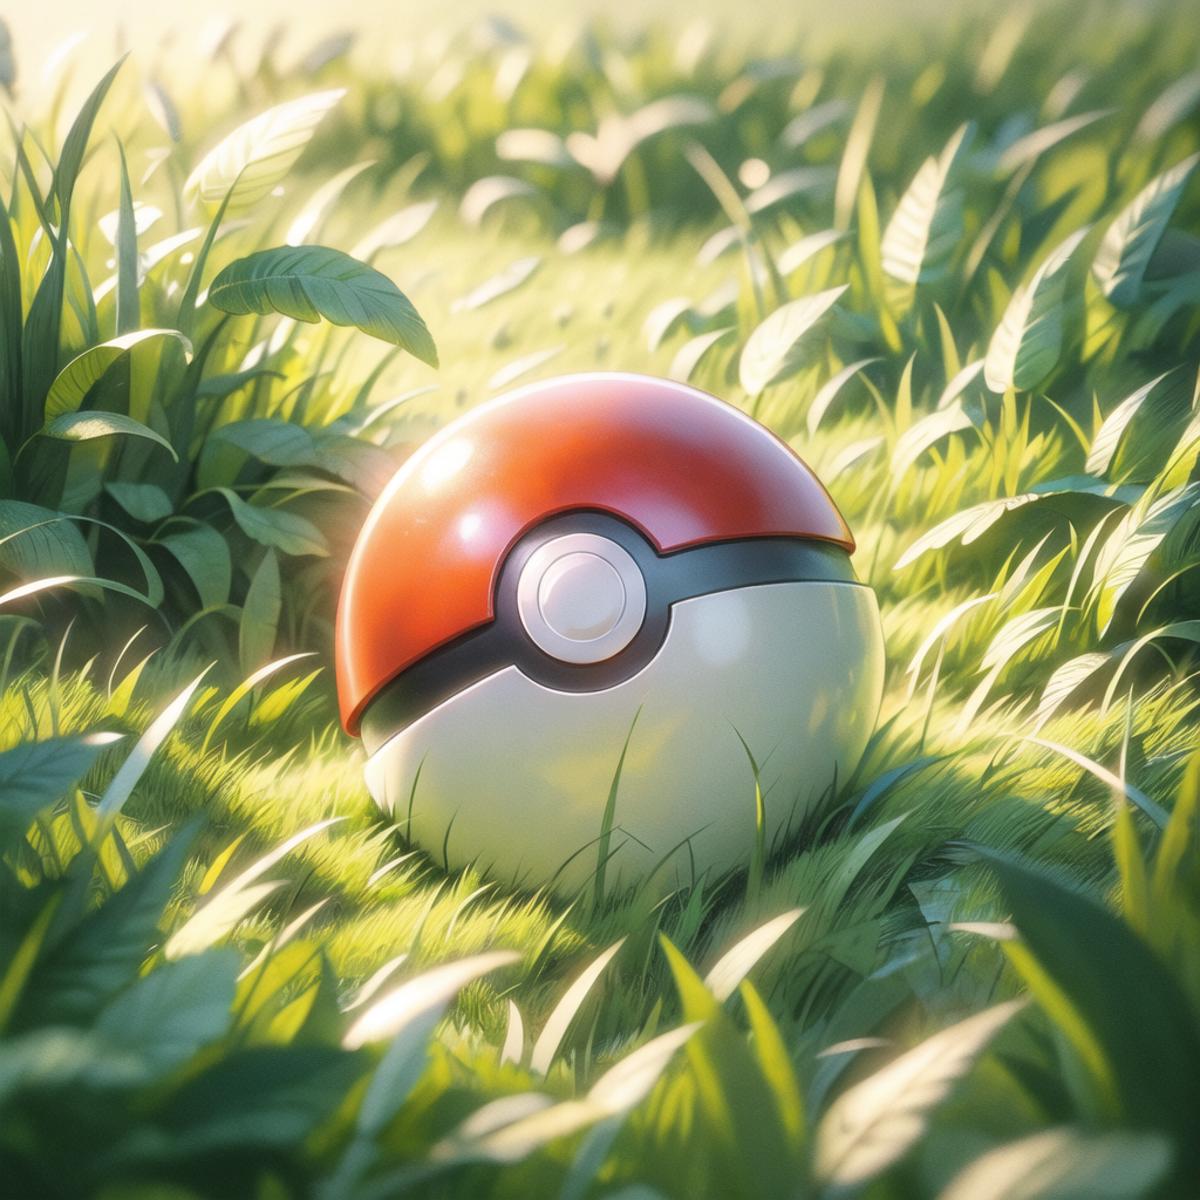 A Pokemon ball sits on top of a grassy field.